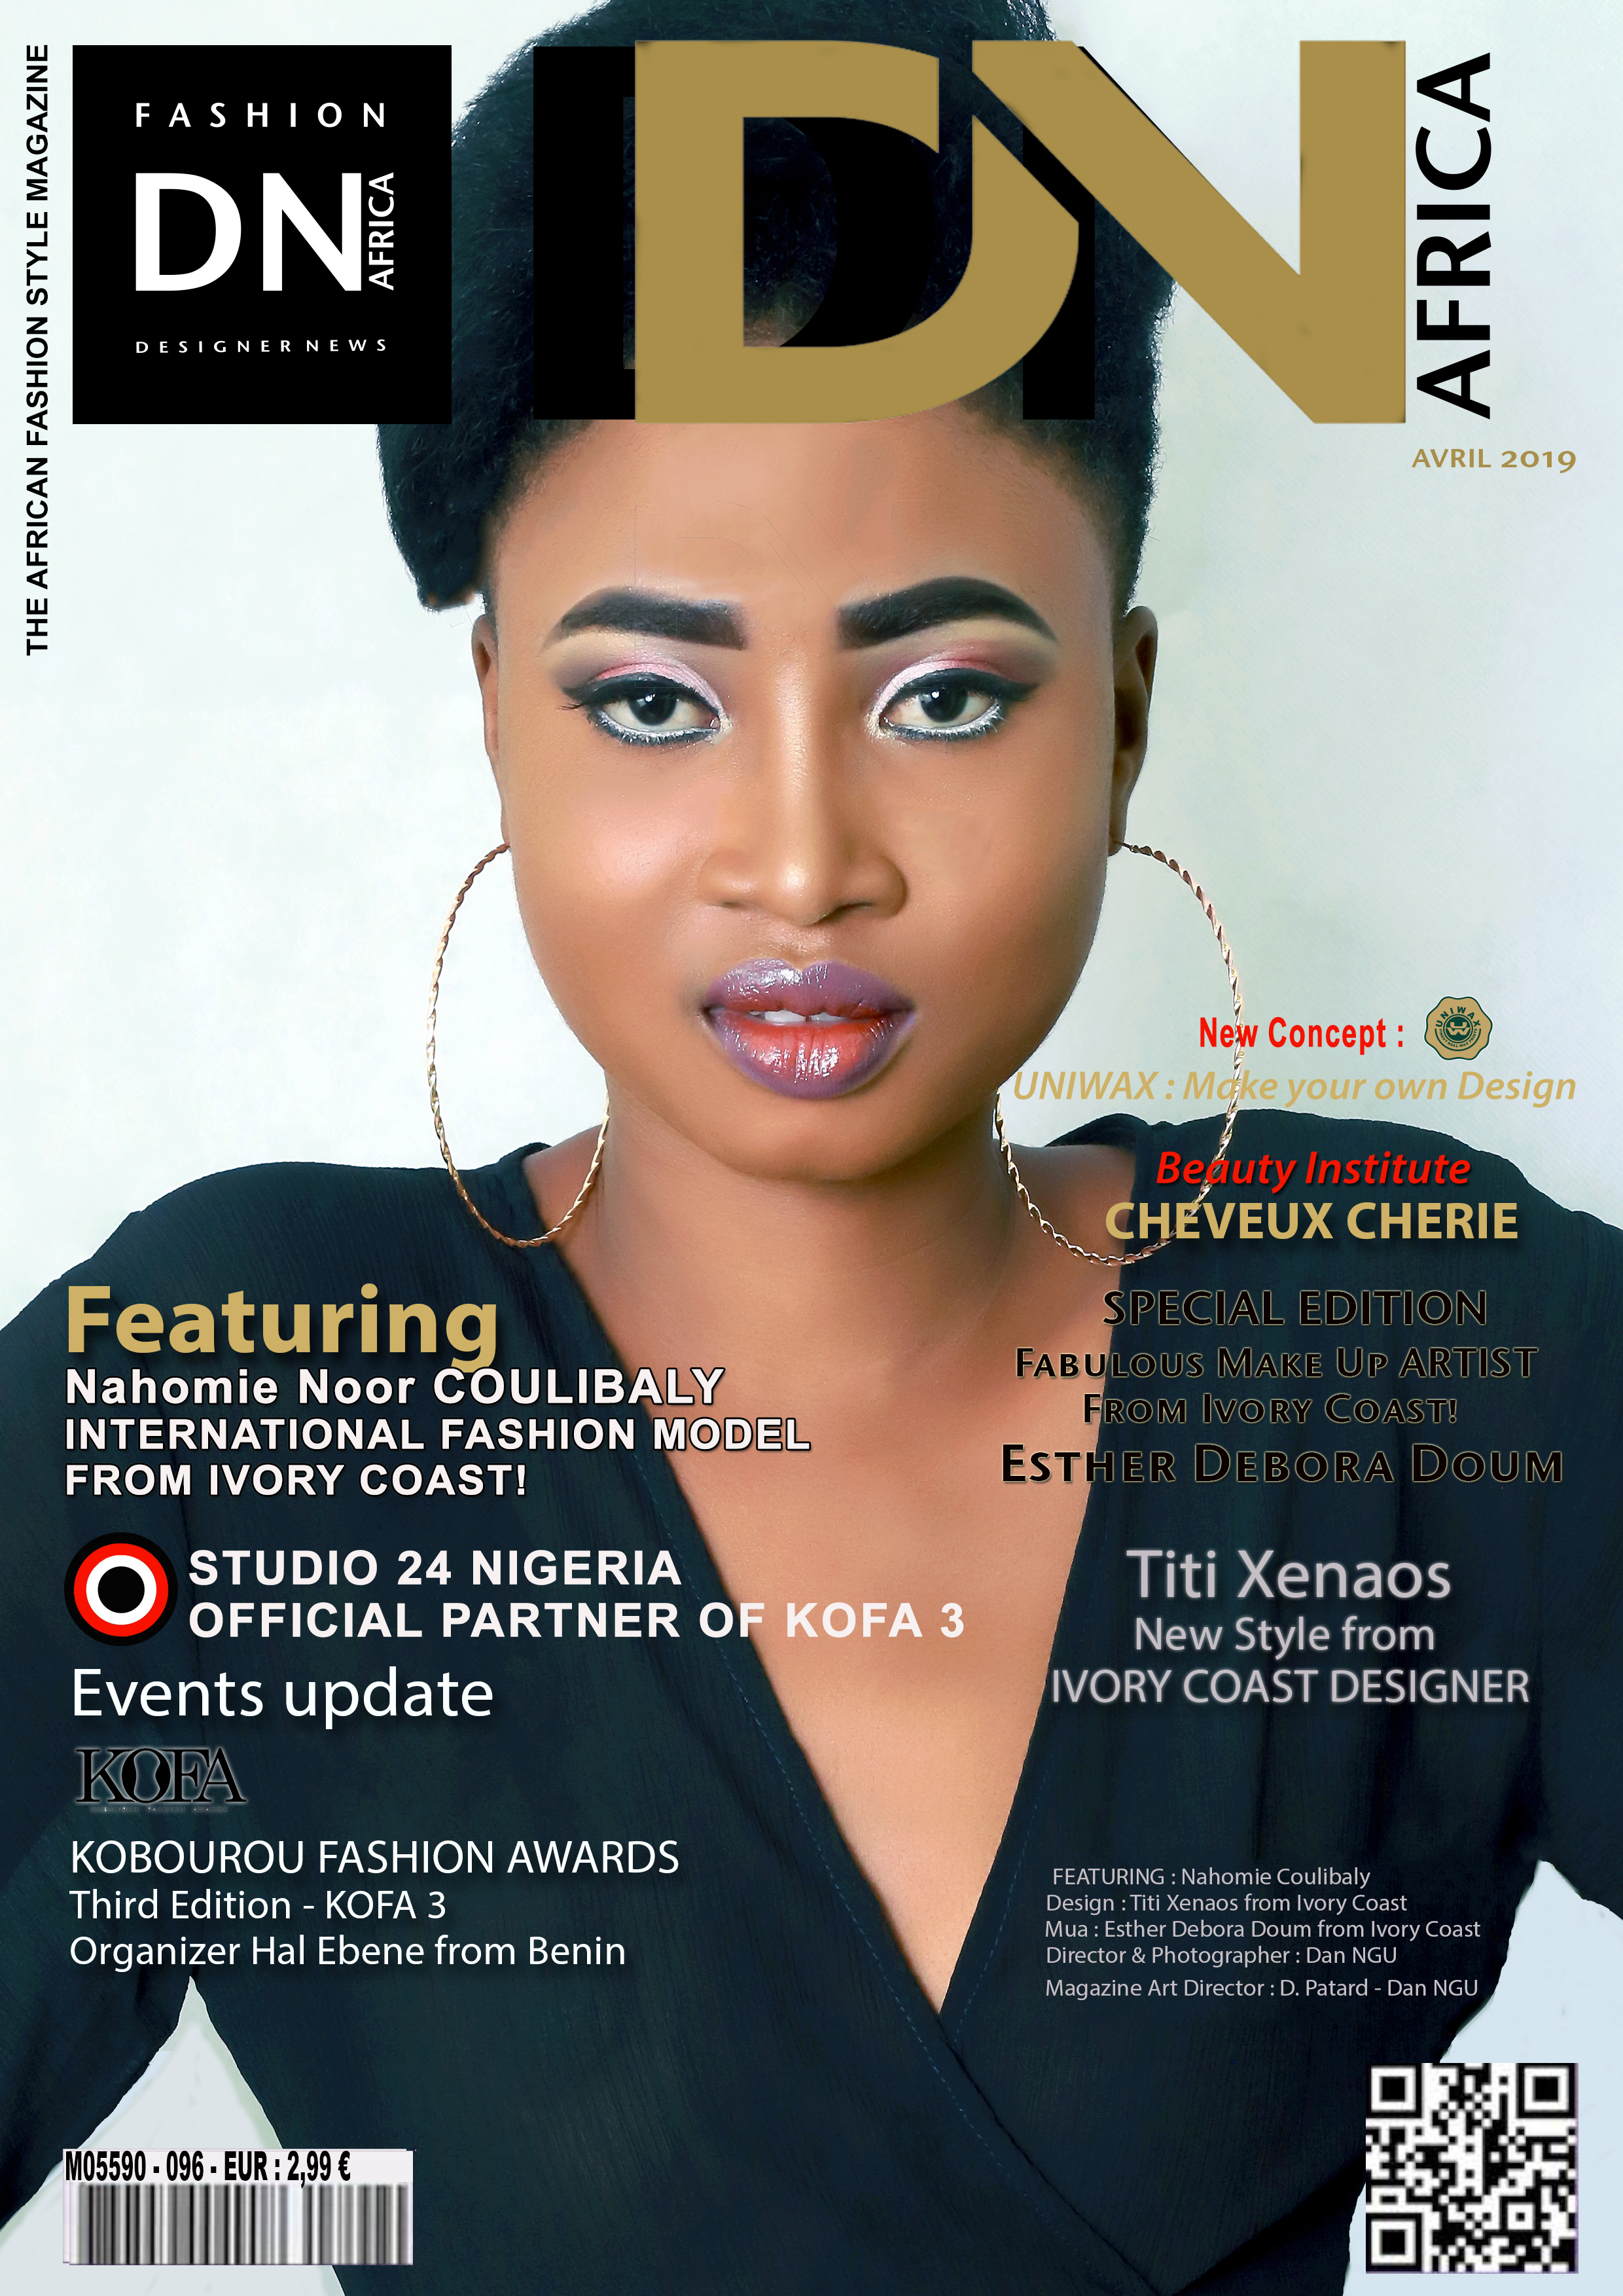 AFRICAN FASHION STYLE MAGAZINE - may 2019 COVER - number 96 - Nahomie Noor COULIBALY International Model - Official Media Partner DN AFRICA - STUDIO 24 NIGERIA - STUDIO 24 INTERNATIONAL - Ifeanyi Christopher Oputa MD AND CEO OF COLVI LIMITED AND STUDIO 24 - CHEVEUX CHERIE and CHEVEUX CHERIE STUDIO BY MARIEME DUBOZ- Fashion Editor Nahomie NOOR COULIBALY